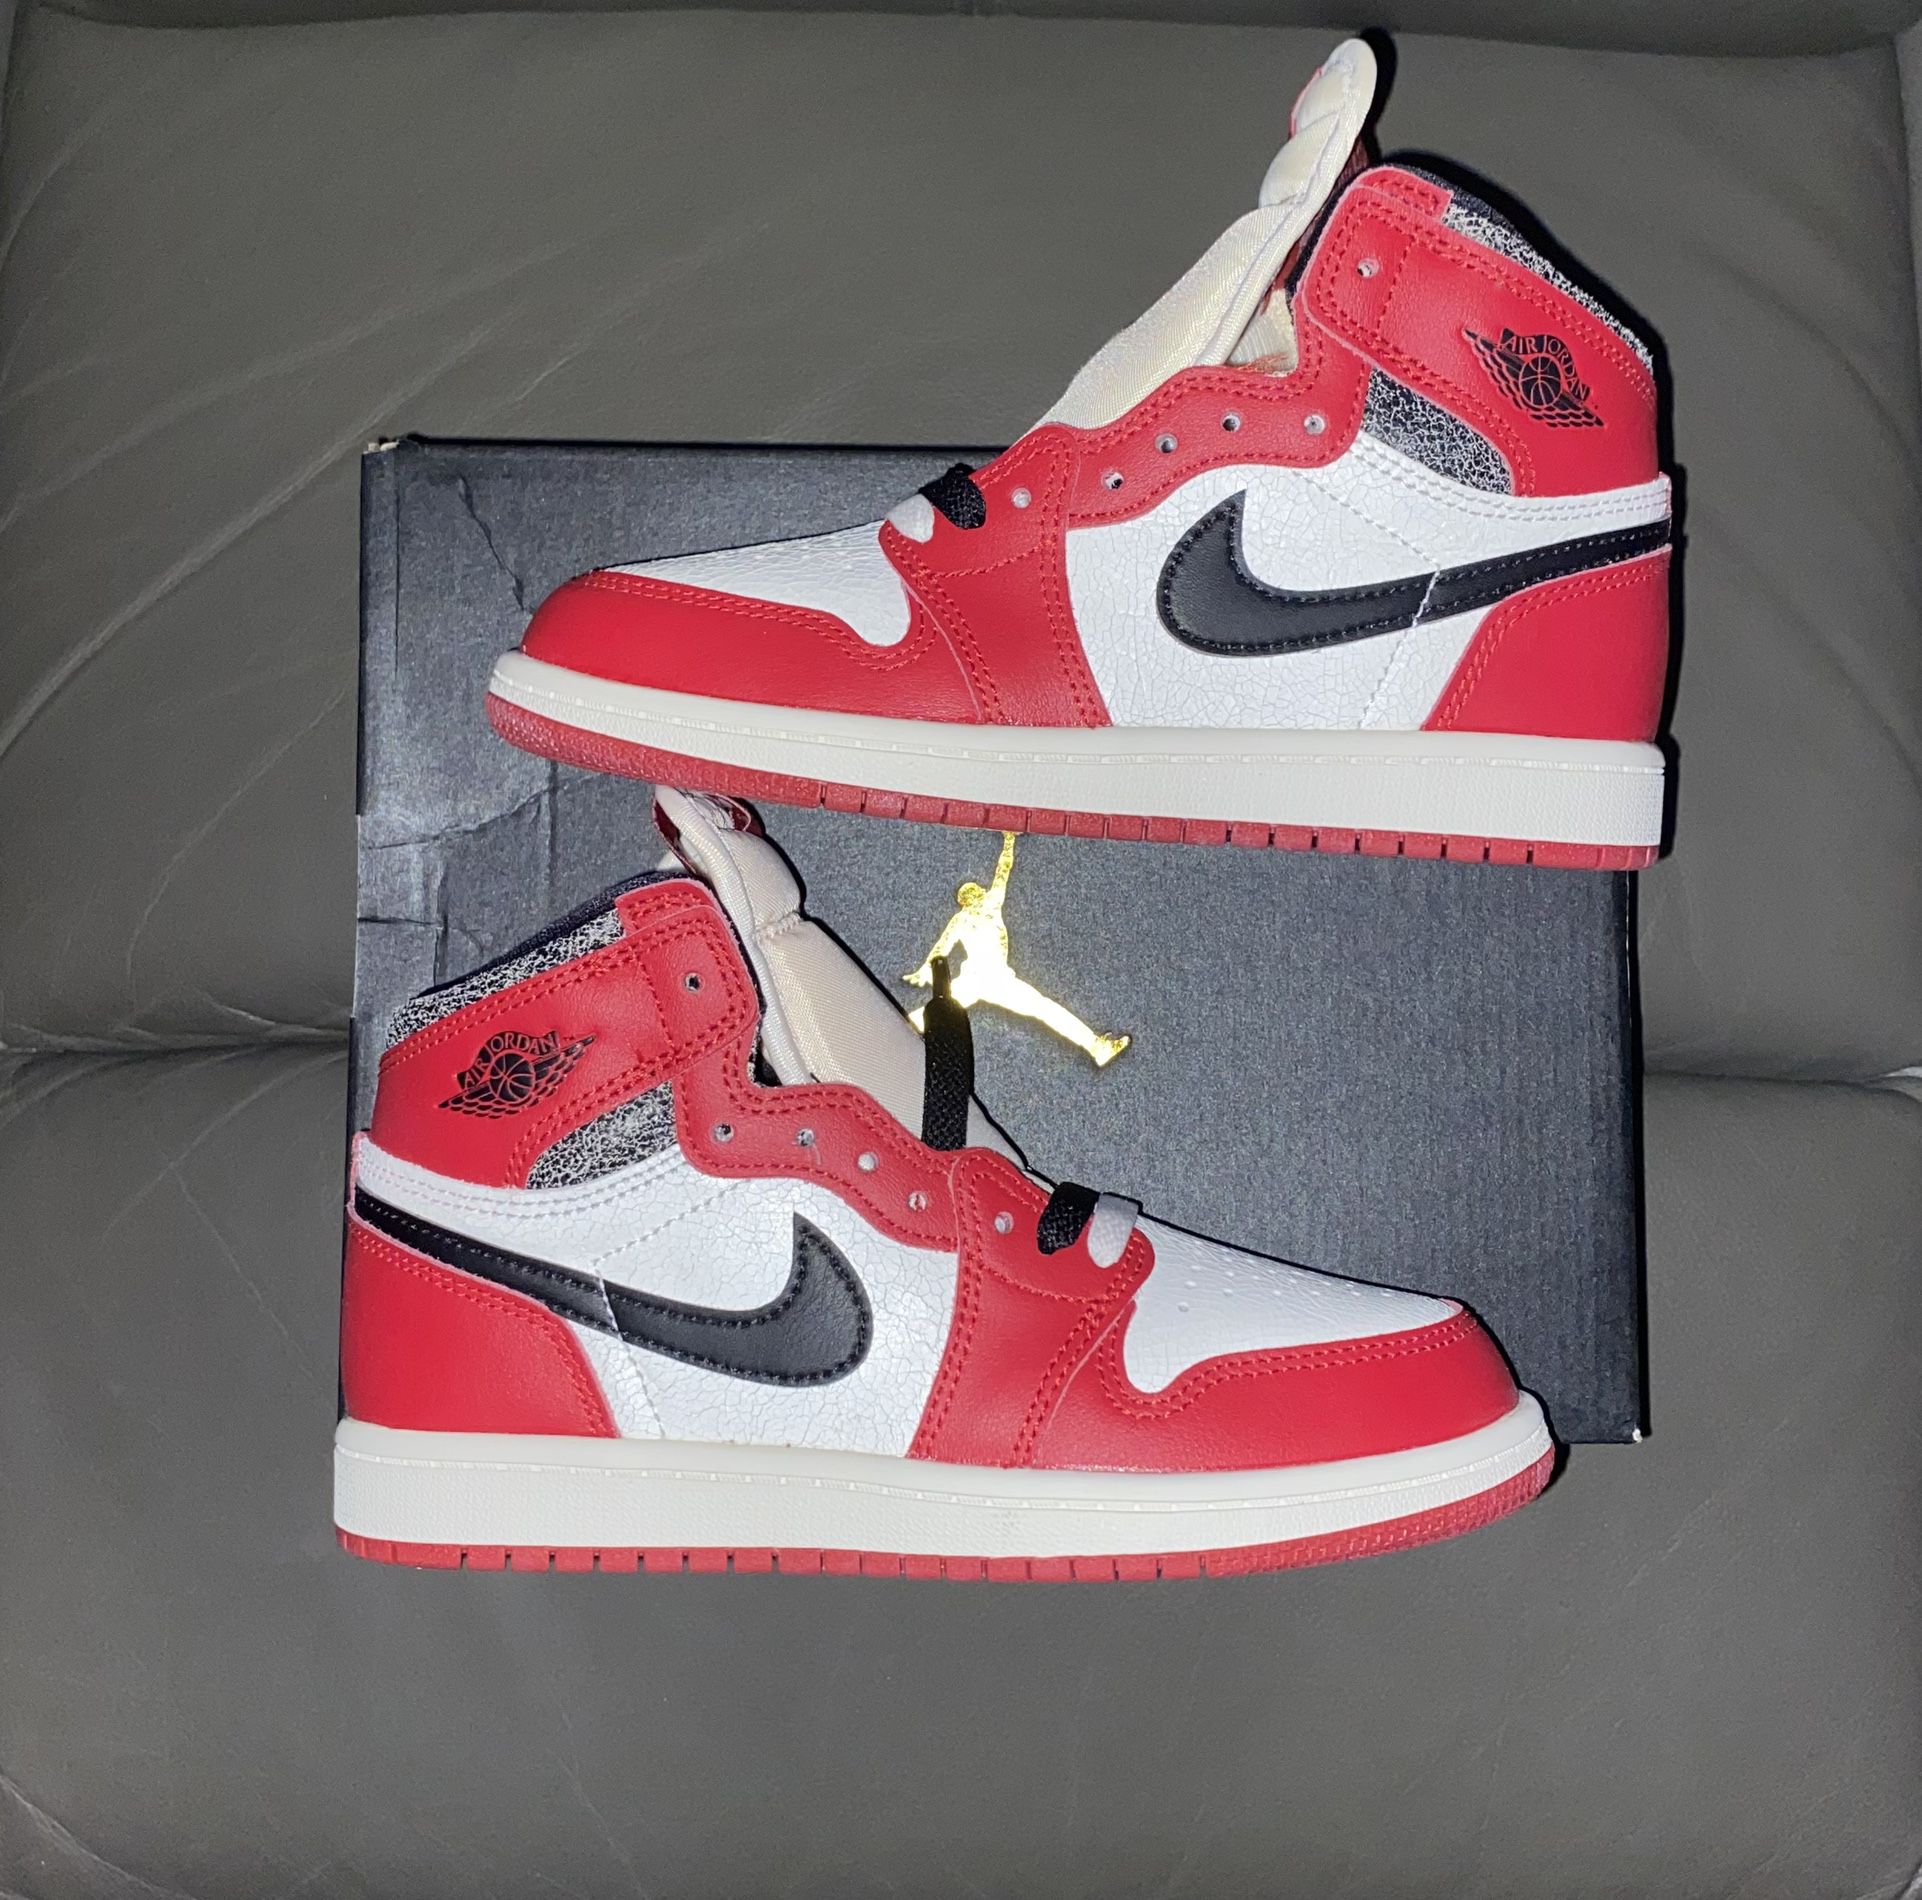 👠Jordan 1 ow Chicago👠 ❗️SOLD❗️ @wyatt_young23 Size 9 comes as shown Bin:  2300 Dm or comment to offer! Will let go of these if it's for…